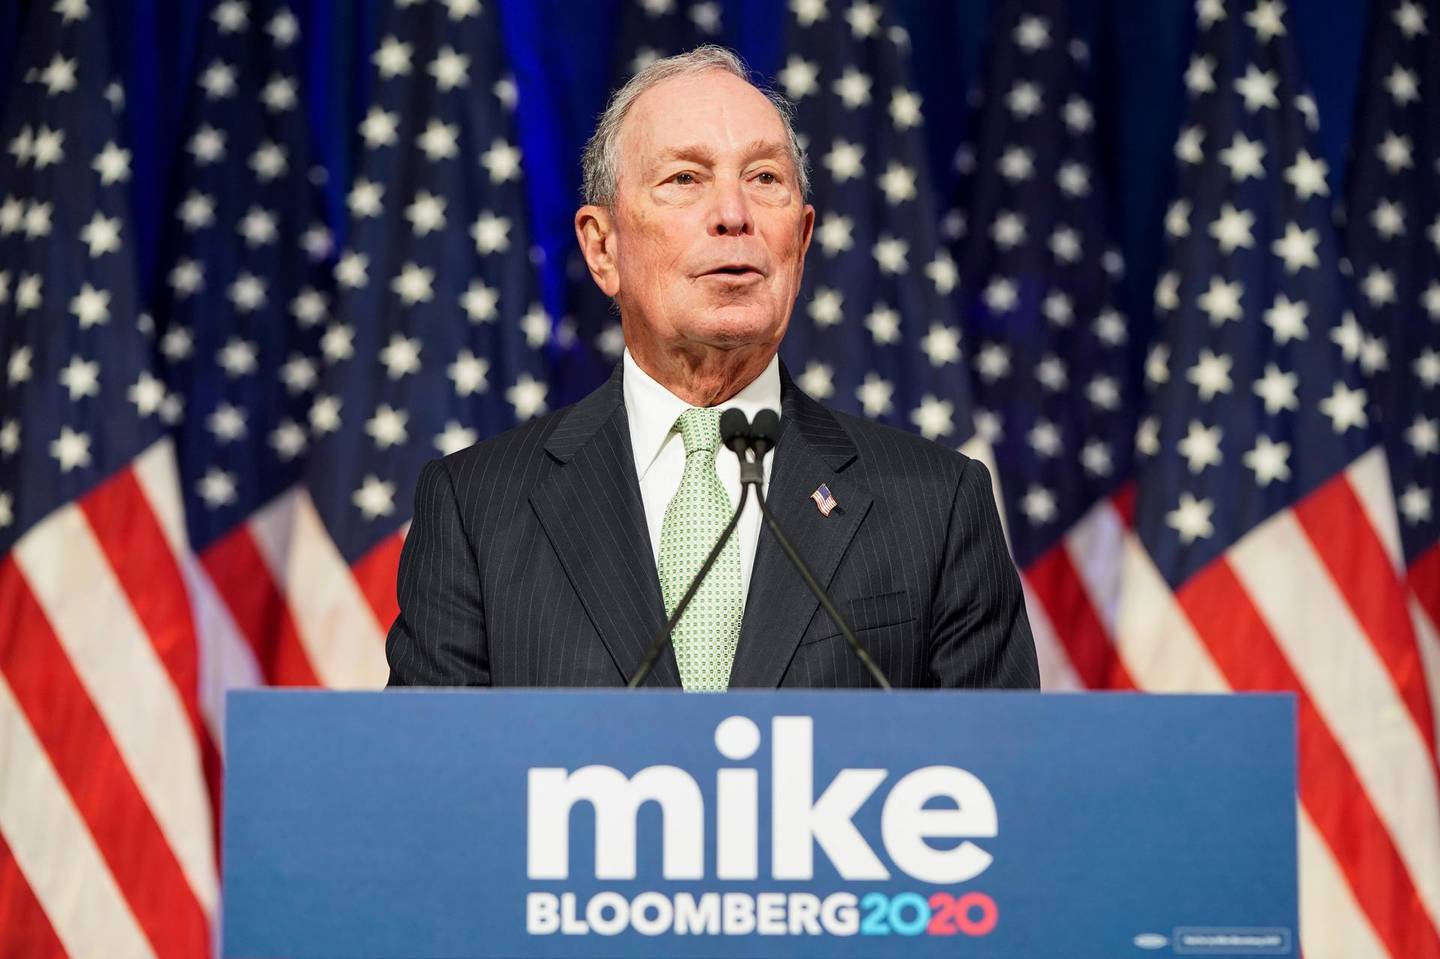 Democratic U.S. presidential candidate Michael Bloomberg addresses a news conference after launching his presidential bid in Norfolk, Virginia, U.S., November 25, 2019. REUTERS/Joshua Roberts     TPX IMAGES OF THE DAY